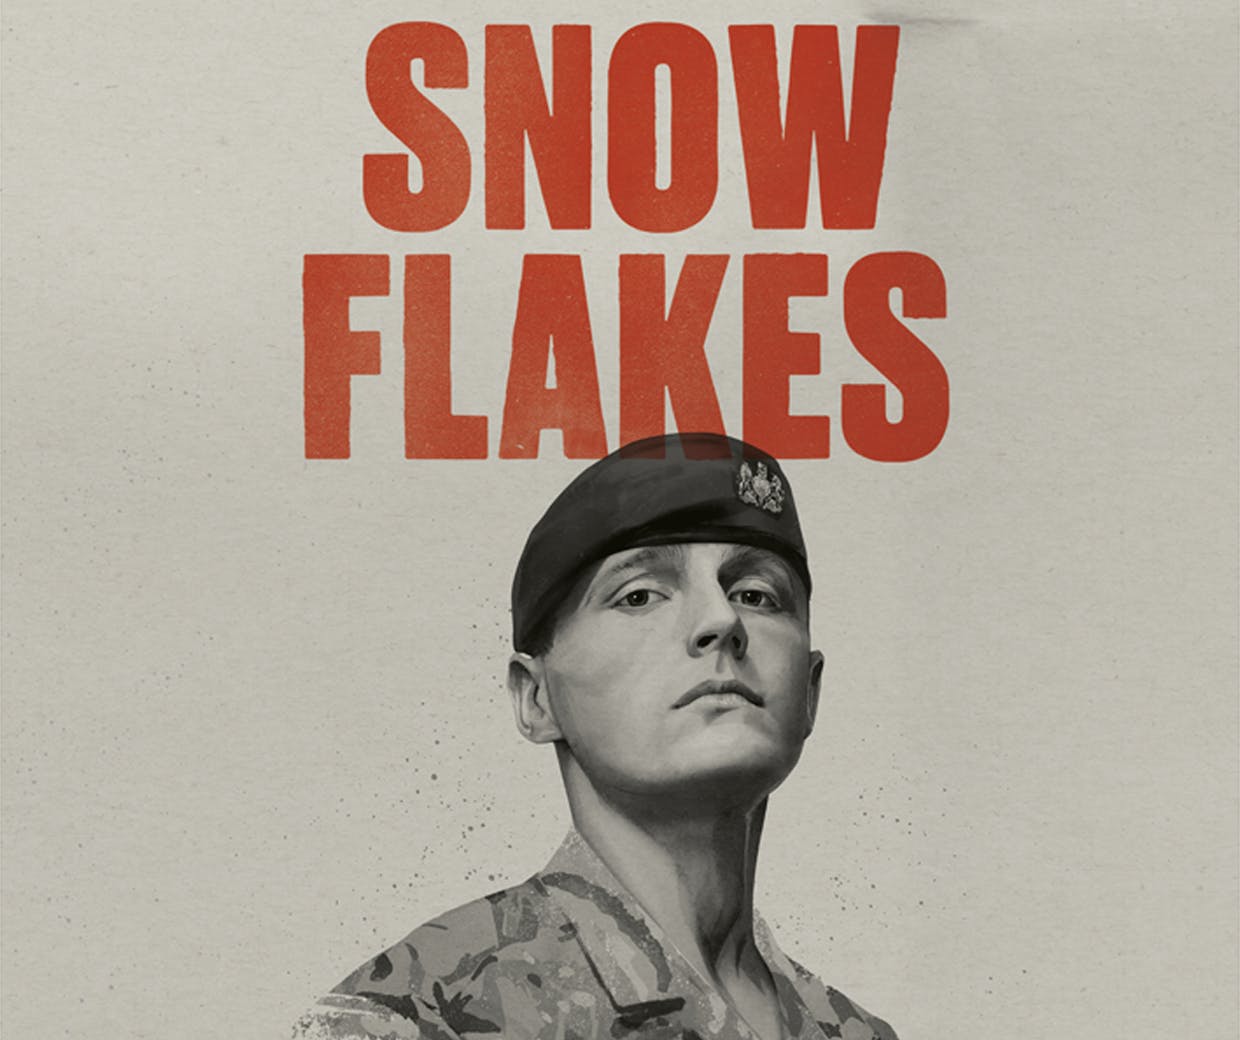 How the British Army's ‘Snowflake’ ads led to a 'shift in perceptions and attitudes'